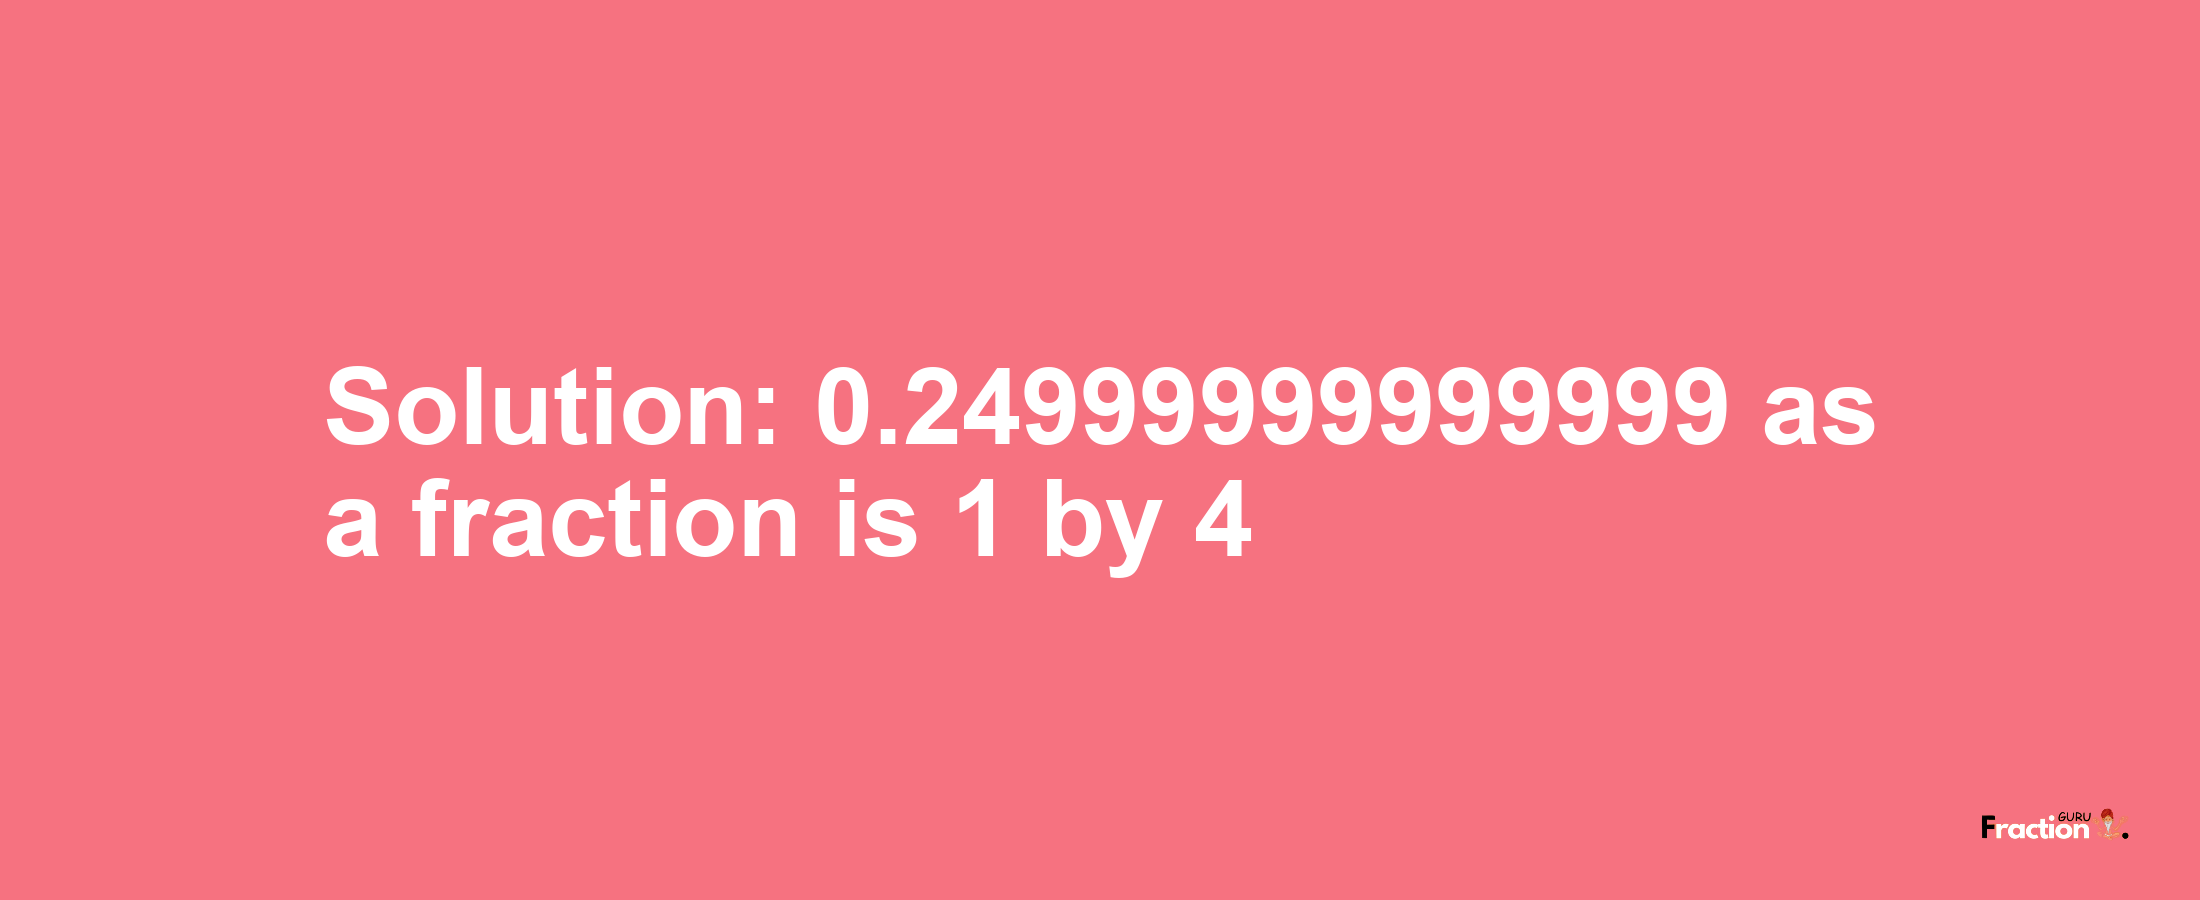 Solution:0.24999999999999 as a fraction is 1/4